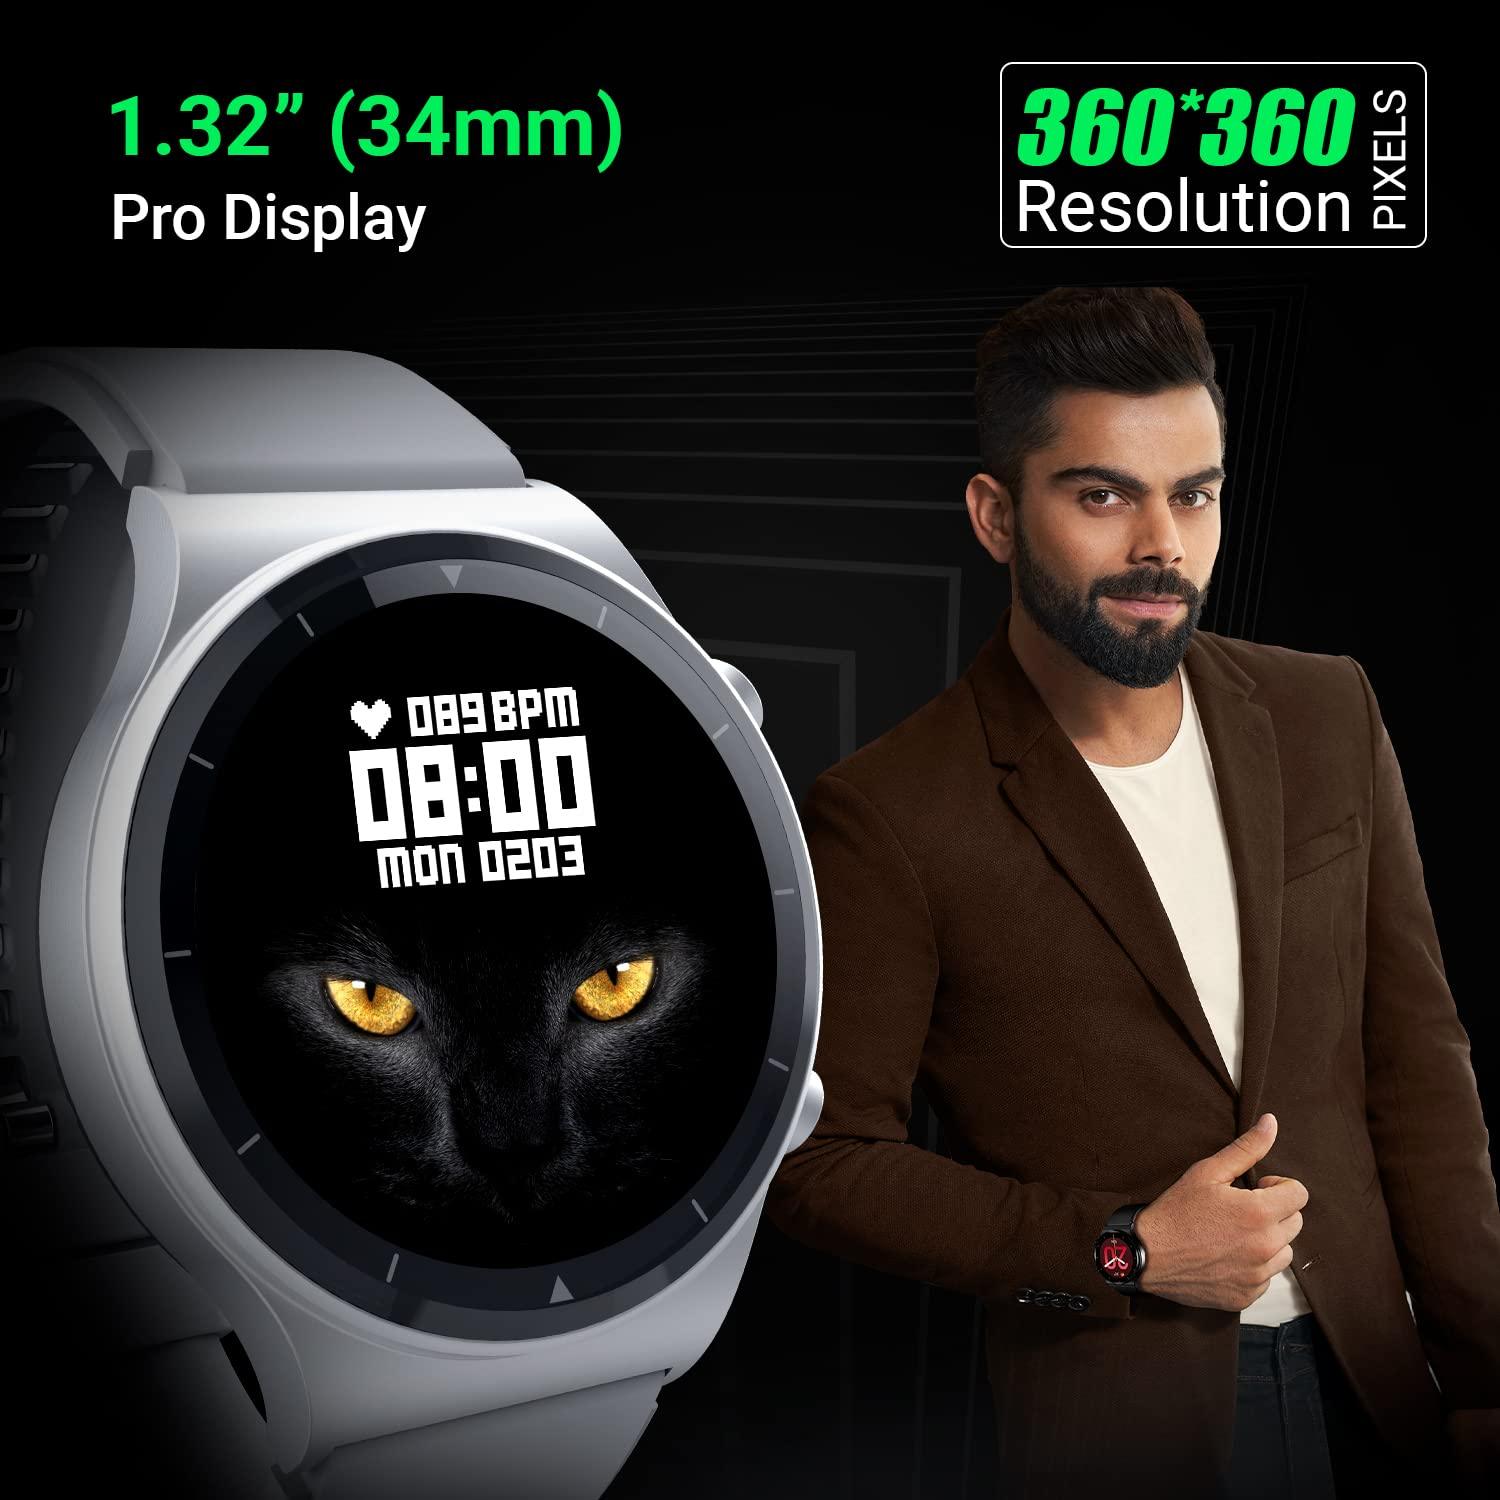 Fire-Boltt 360 Pro Bluetooth Calling, Local Music and TWS Pairing, 360*360 PRO Display Smart Watch with Rolling UI & Dual Button Technology, Spo2, Heart Rate - Silver, Large (BSW017) - A - onBeli